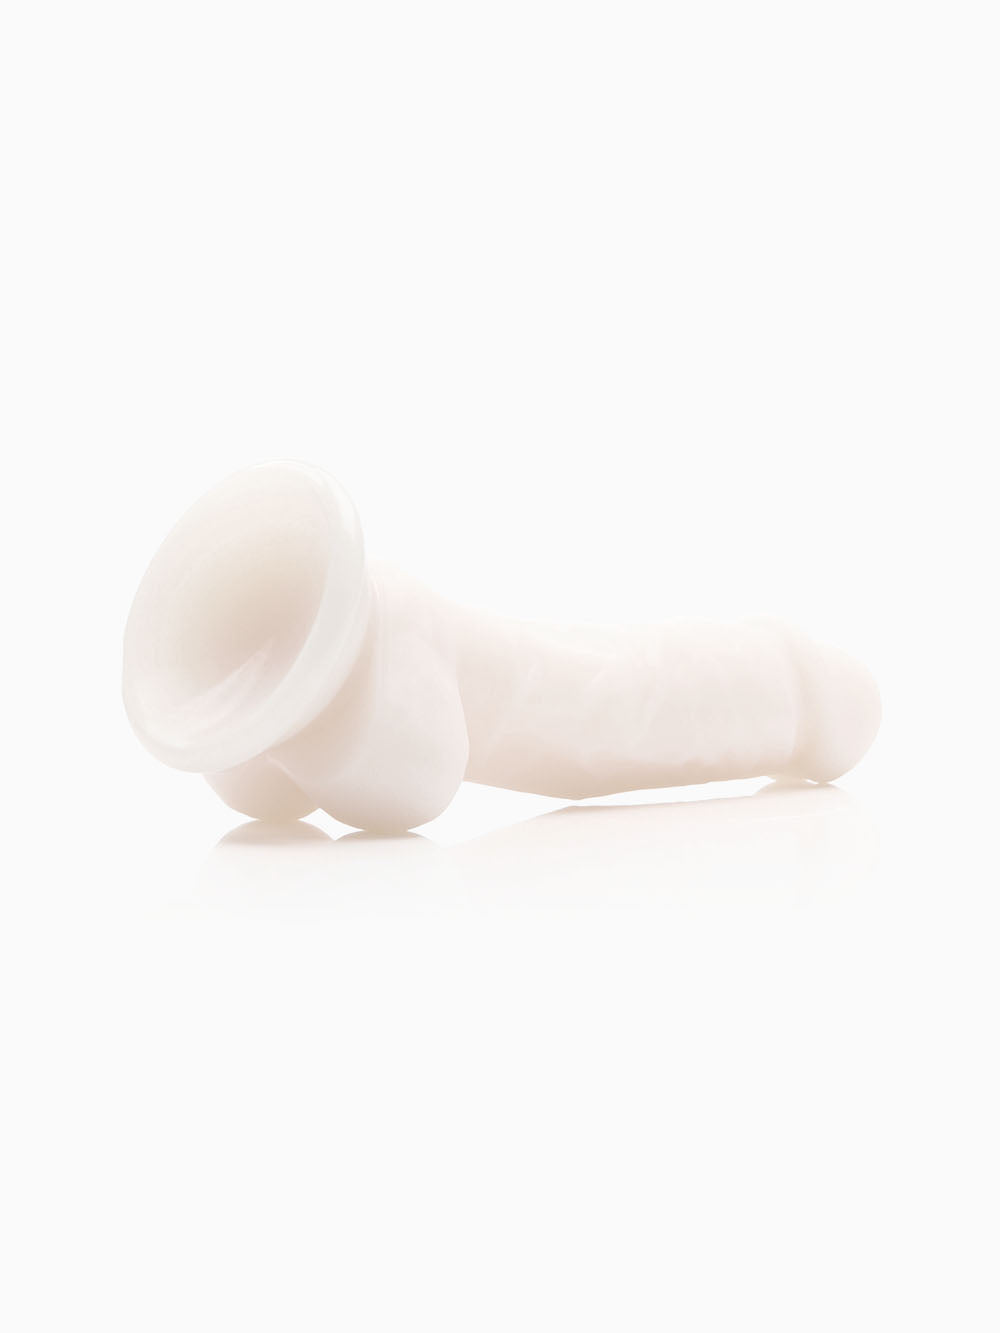 Pillow Talk Suction Cup Dildo, 7 Inches, Tan